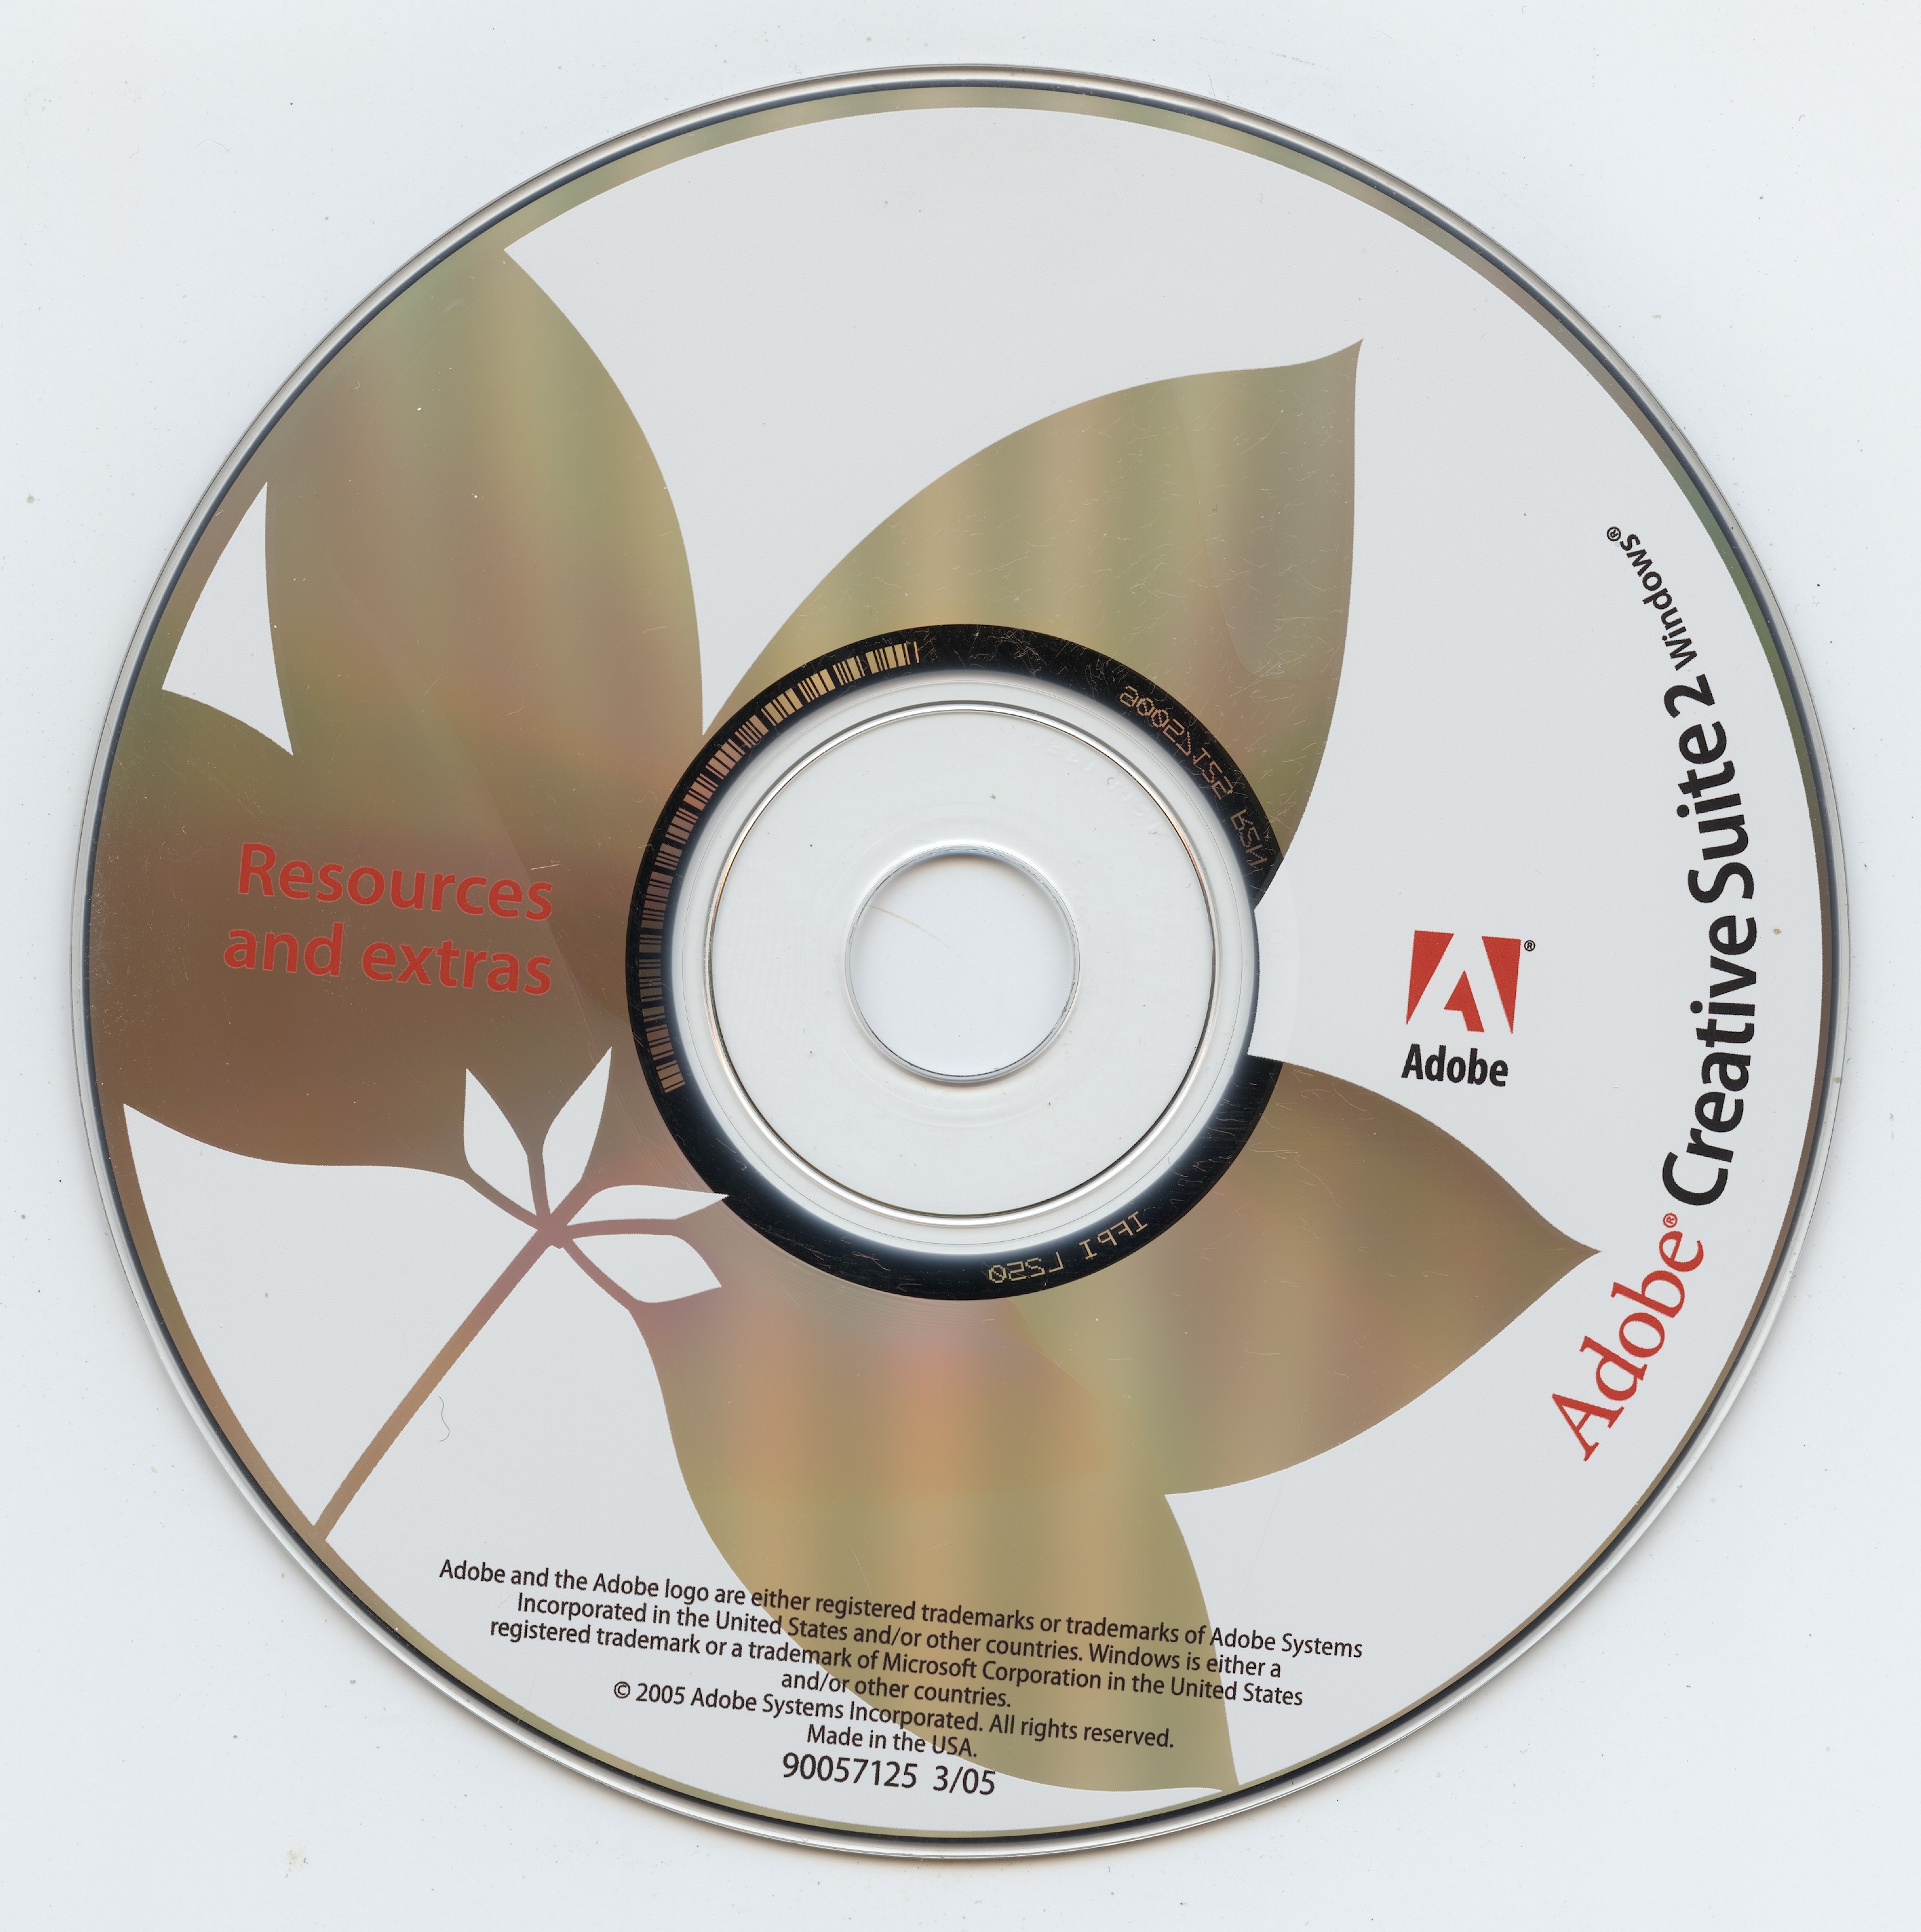 Adobe Creative Suite 2 Windows (Resources and Extras)(90057125 03 05